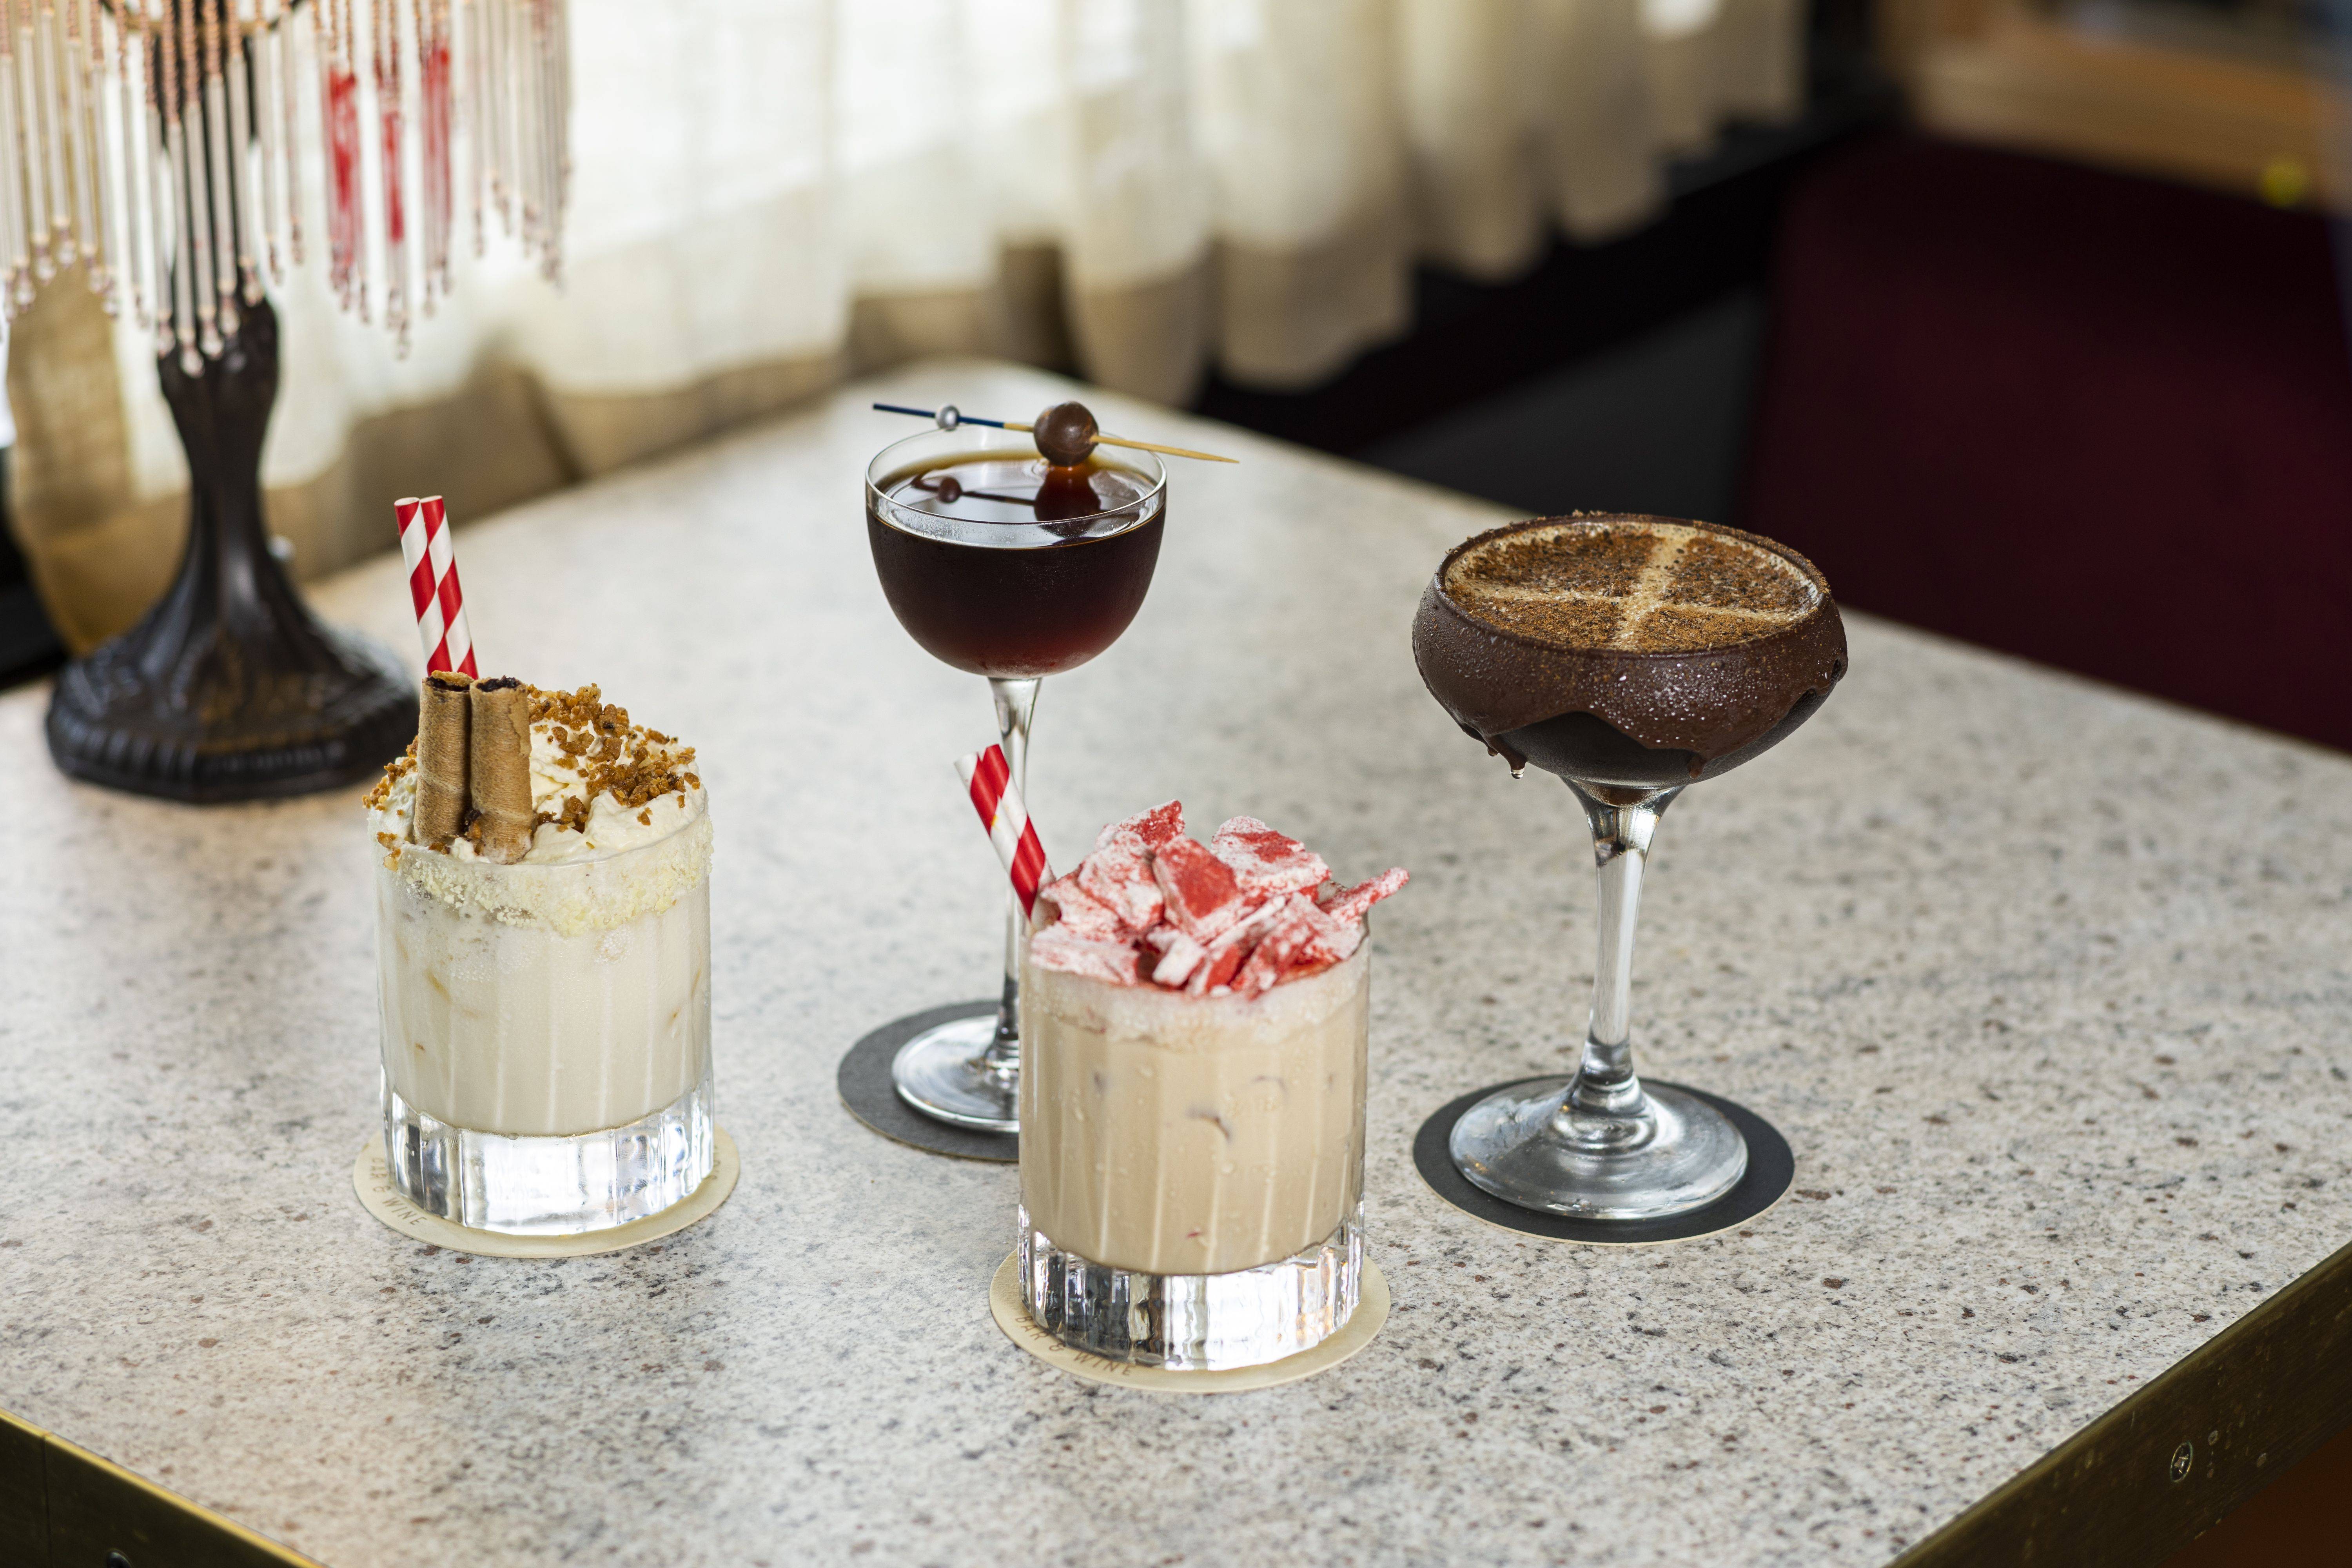 Celebrate Easter with chocolate-themed cocktails at Wakefield's Bar in Ainslie